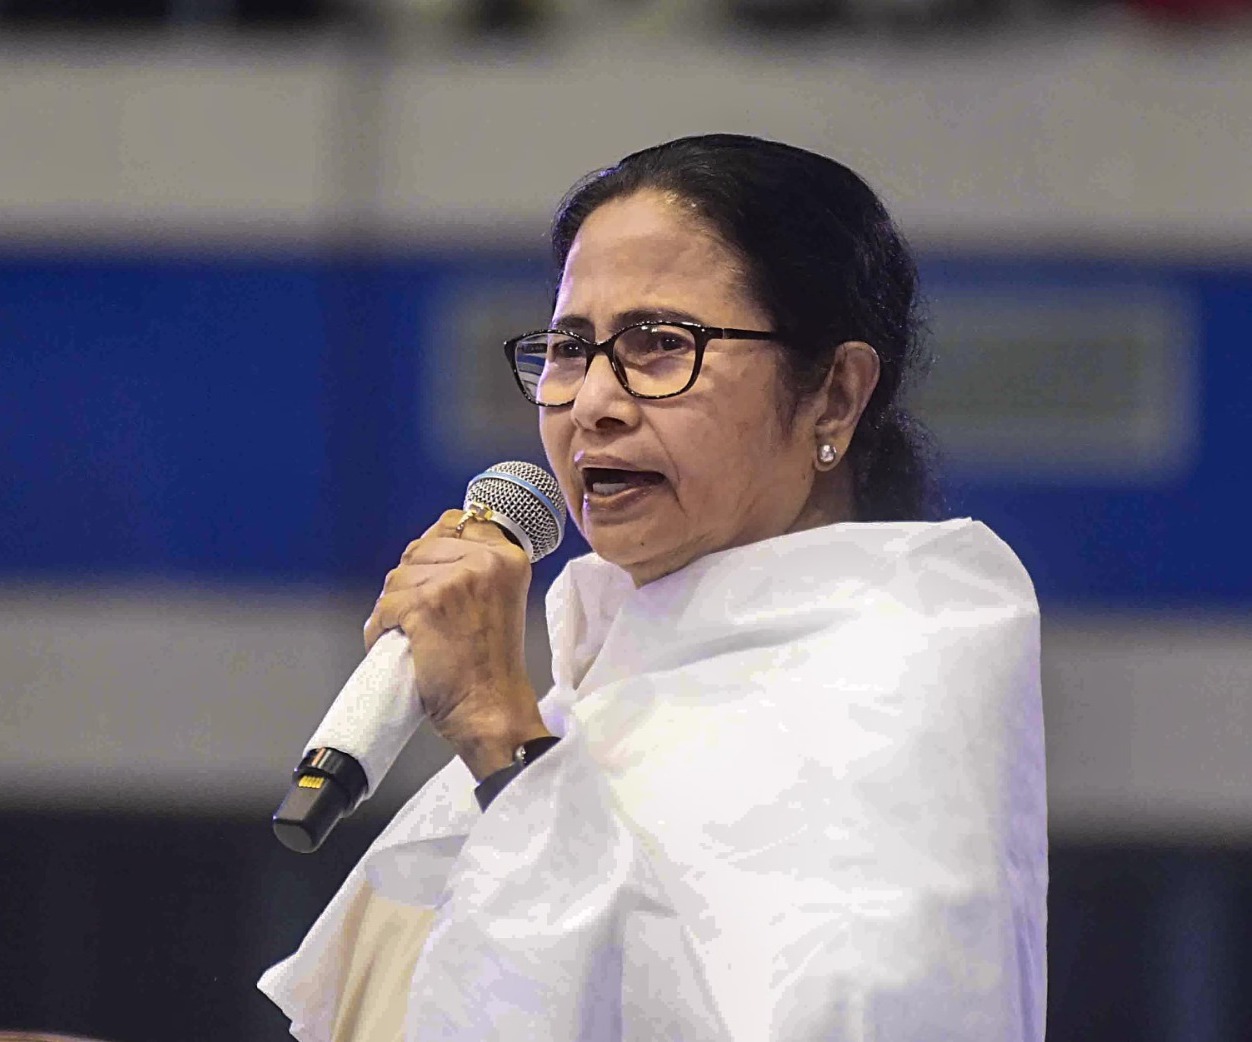 Model Code of Conduct turned into ‘Modi code of conduct’ under BJP rule: Mamata Banerjee